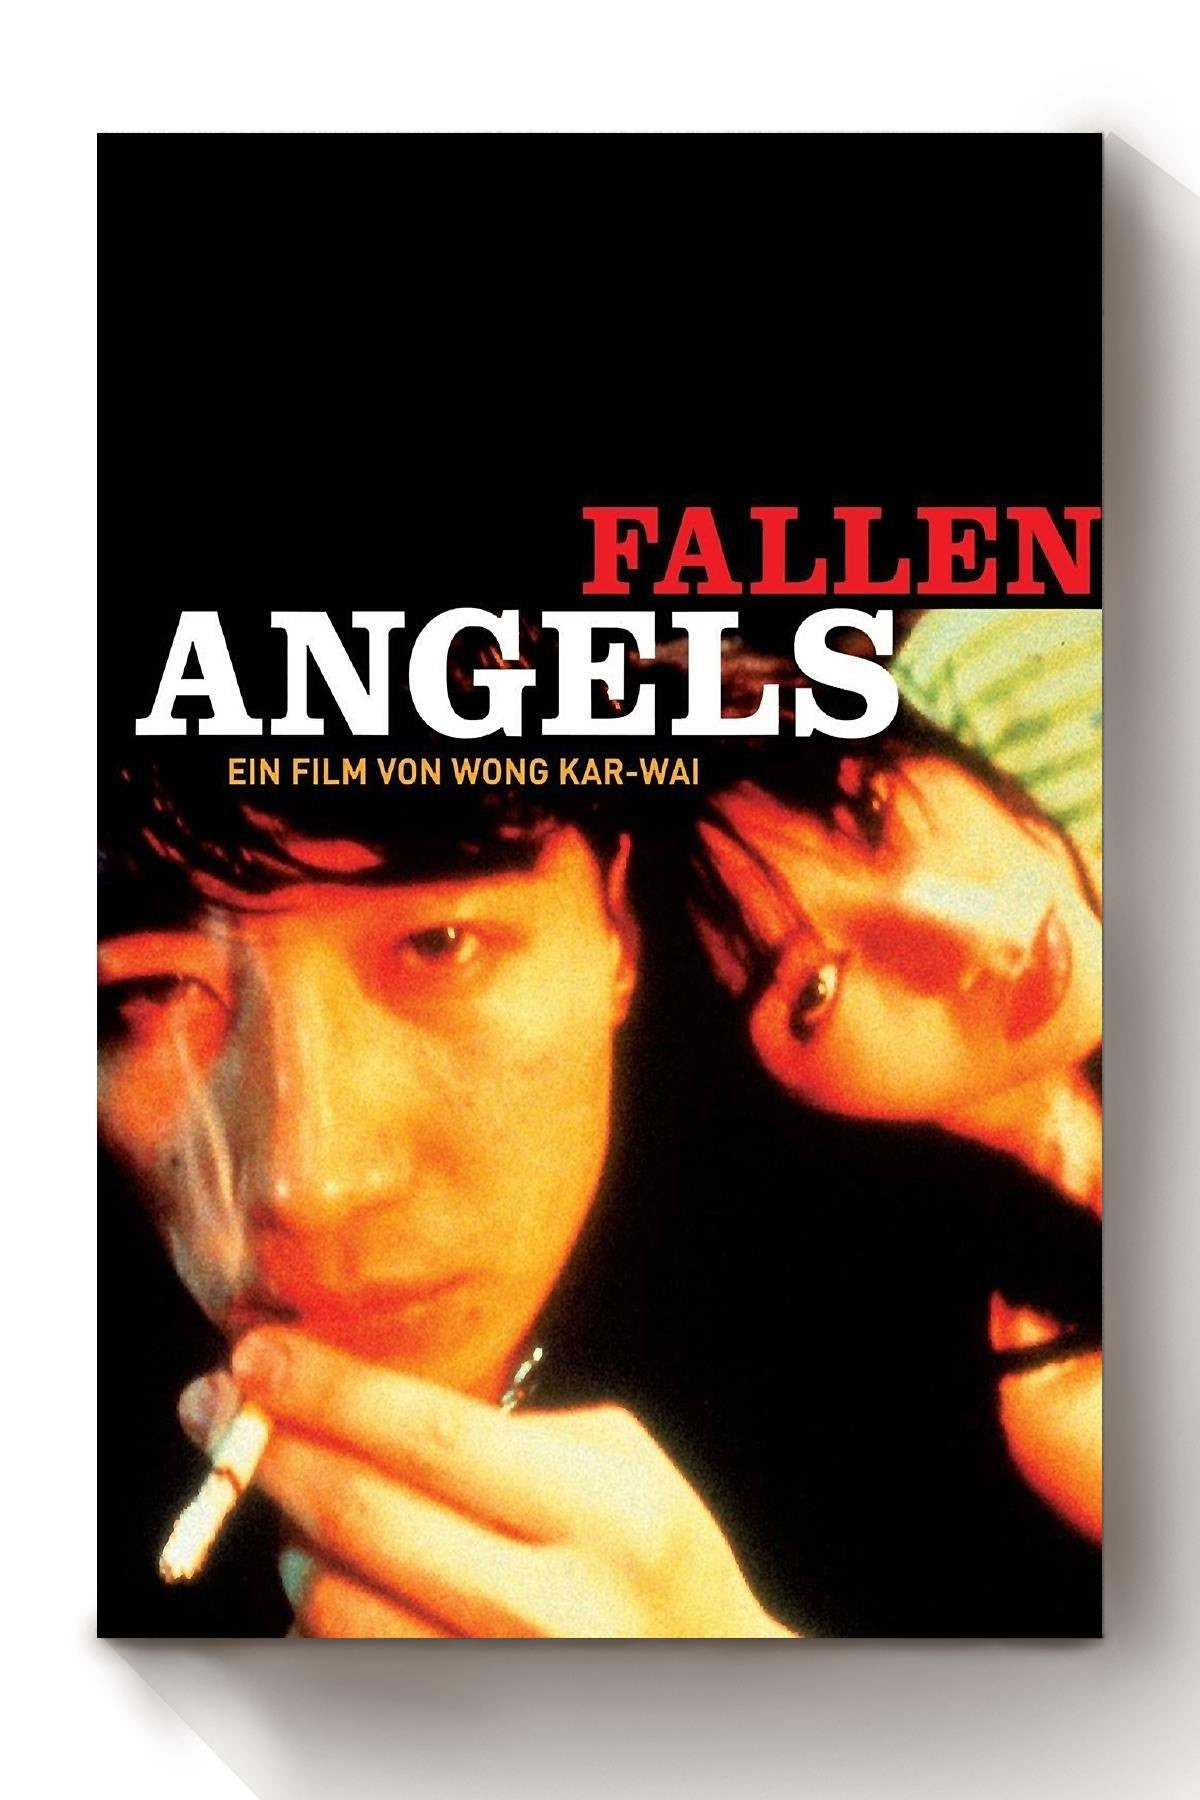 Fallen Angels Hong Kong Drama Movie Canvas Wrapped Canvas 8x10